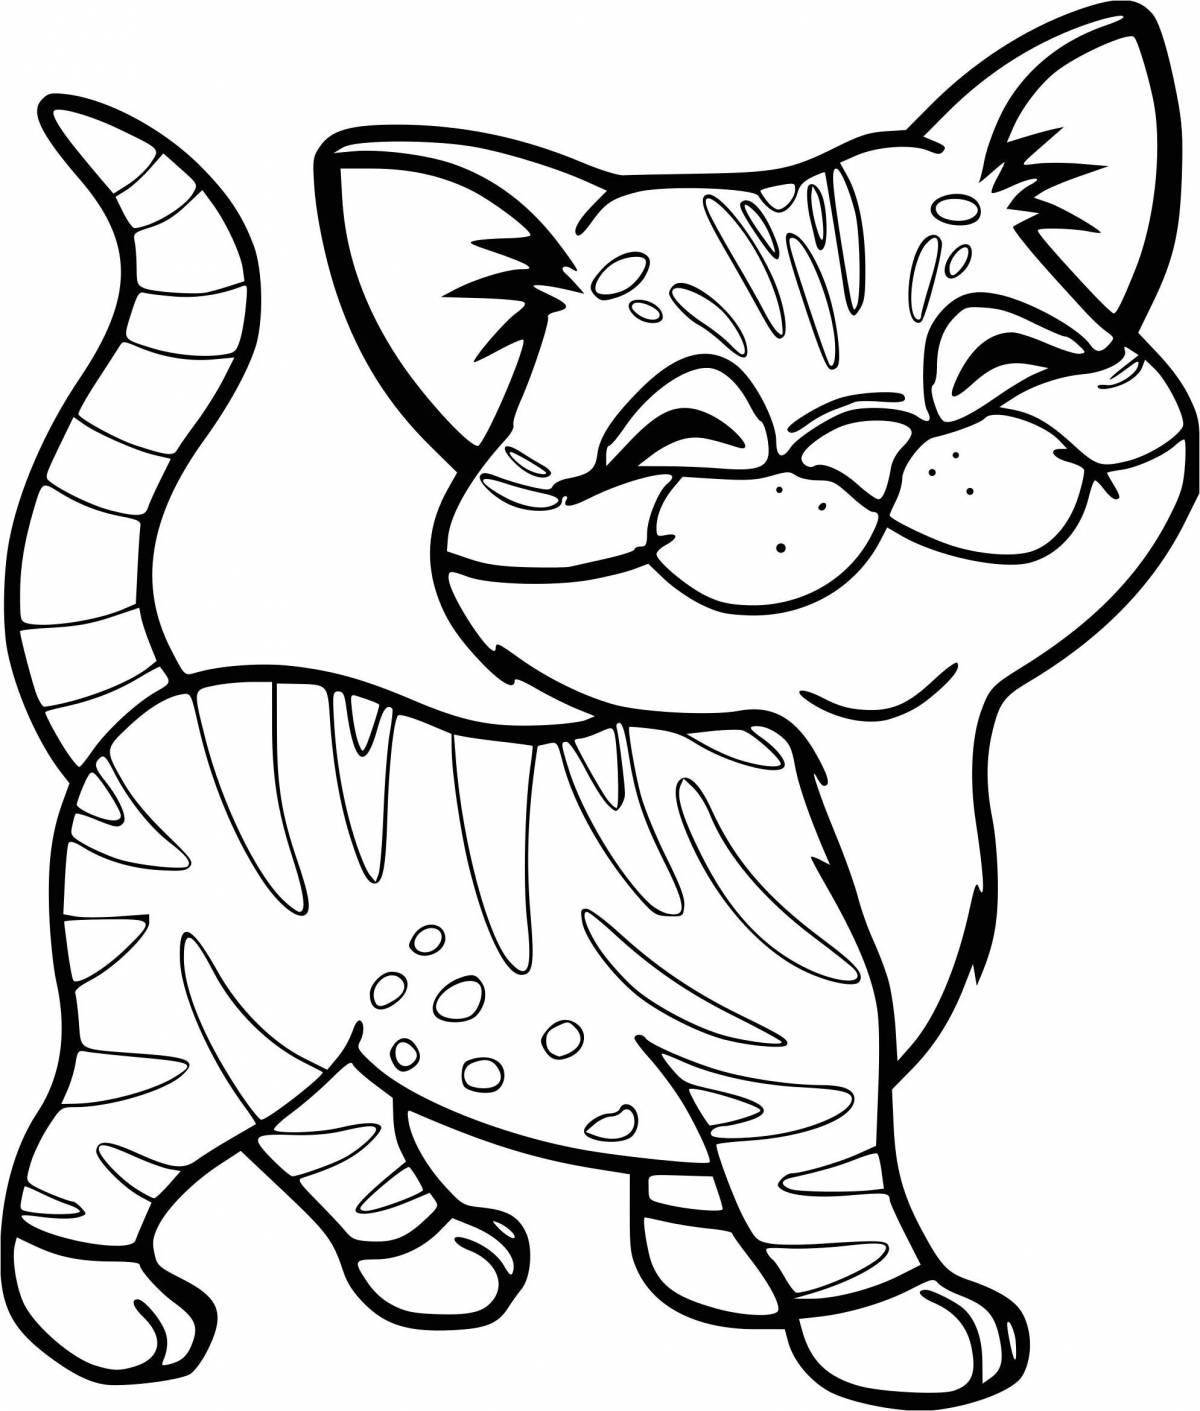 Playful year of the cat coloring page